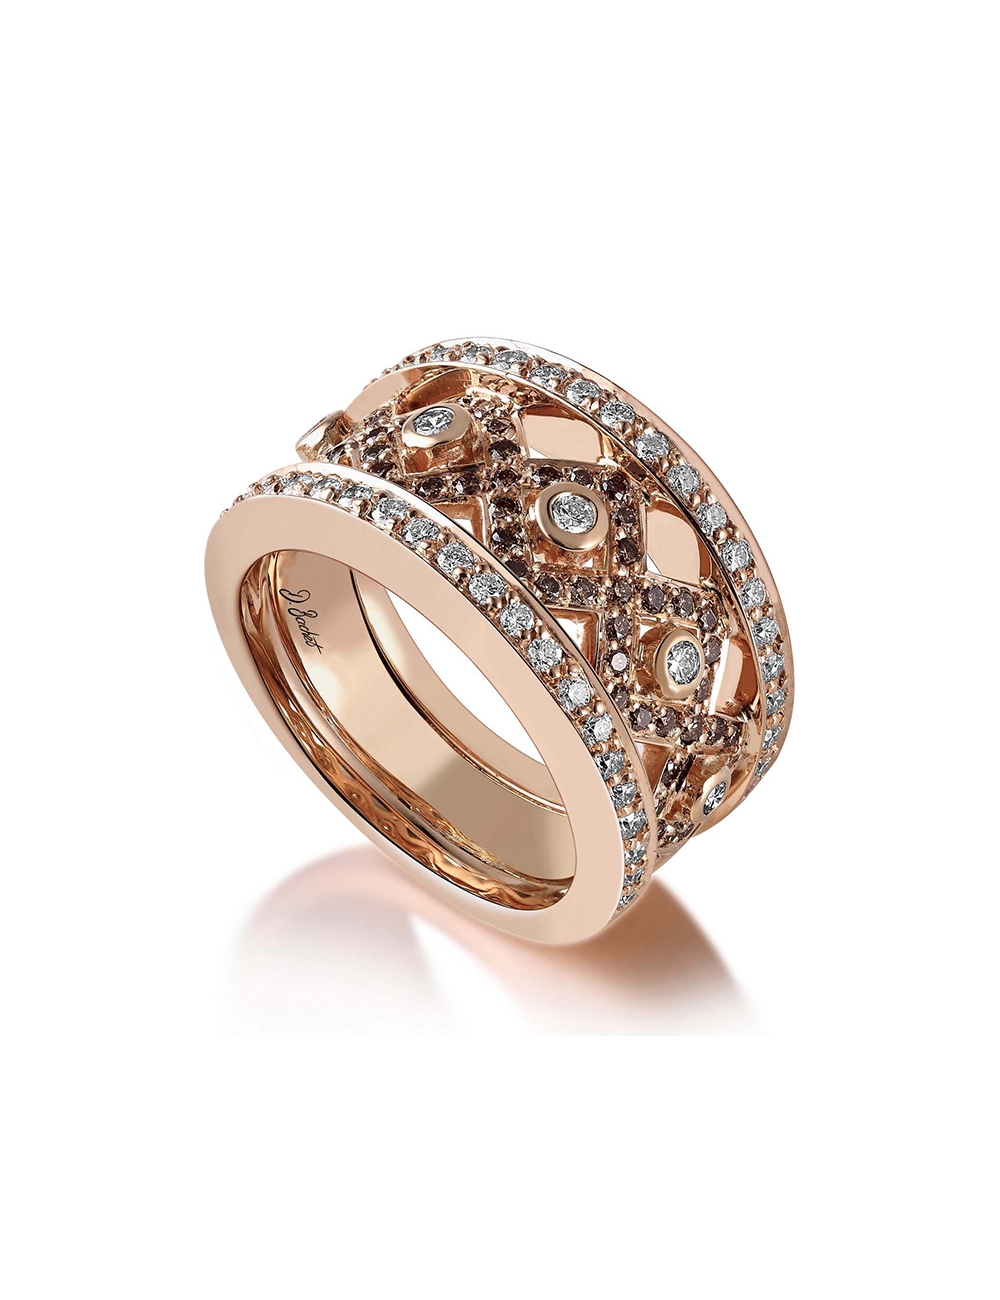 Feminine Rock ring in rose gold with white and brown diamonds, elegant and modern design.